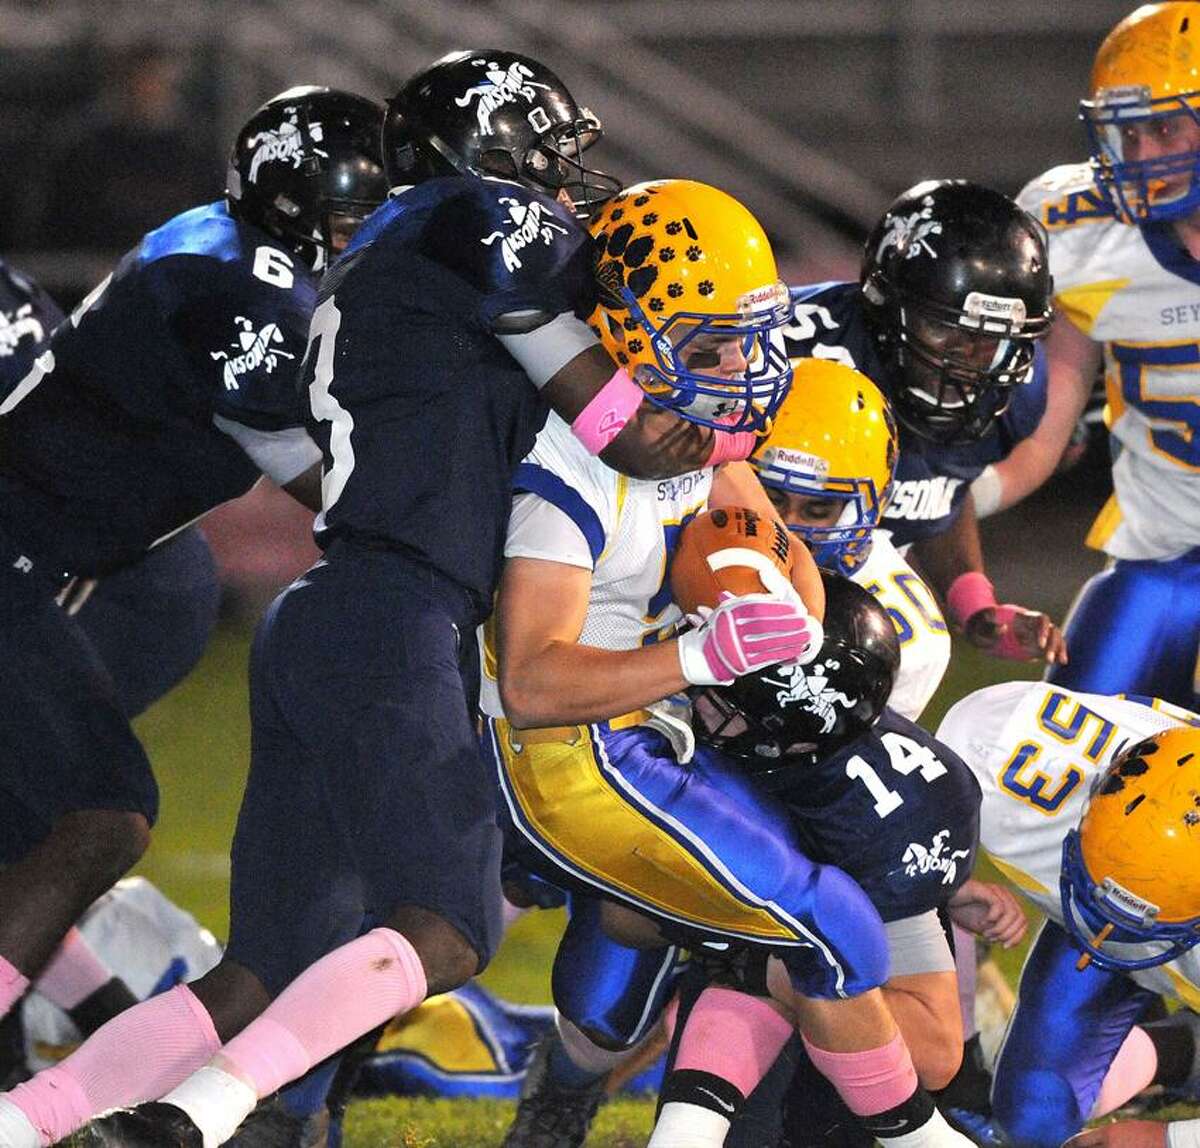 Ansonia-- The Ansonia defense swarms Seymour's Joseph Salemme during the second quarter. Making the tackle is Saiheed Sanders, left, and Joe Price, bottom (#14). Photo Peter Casolino/New Haven Register